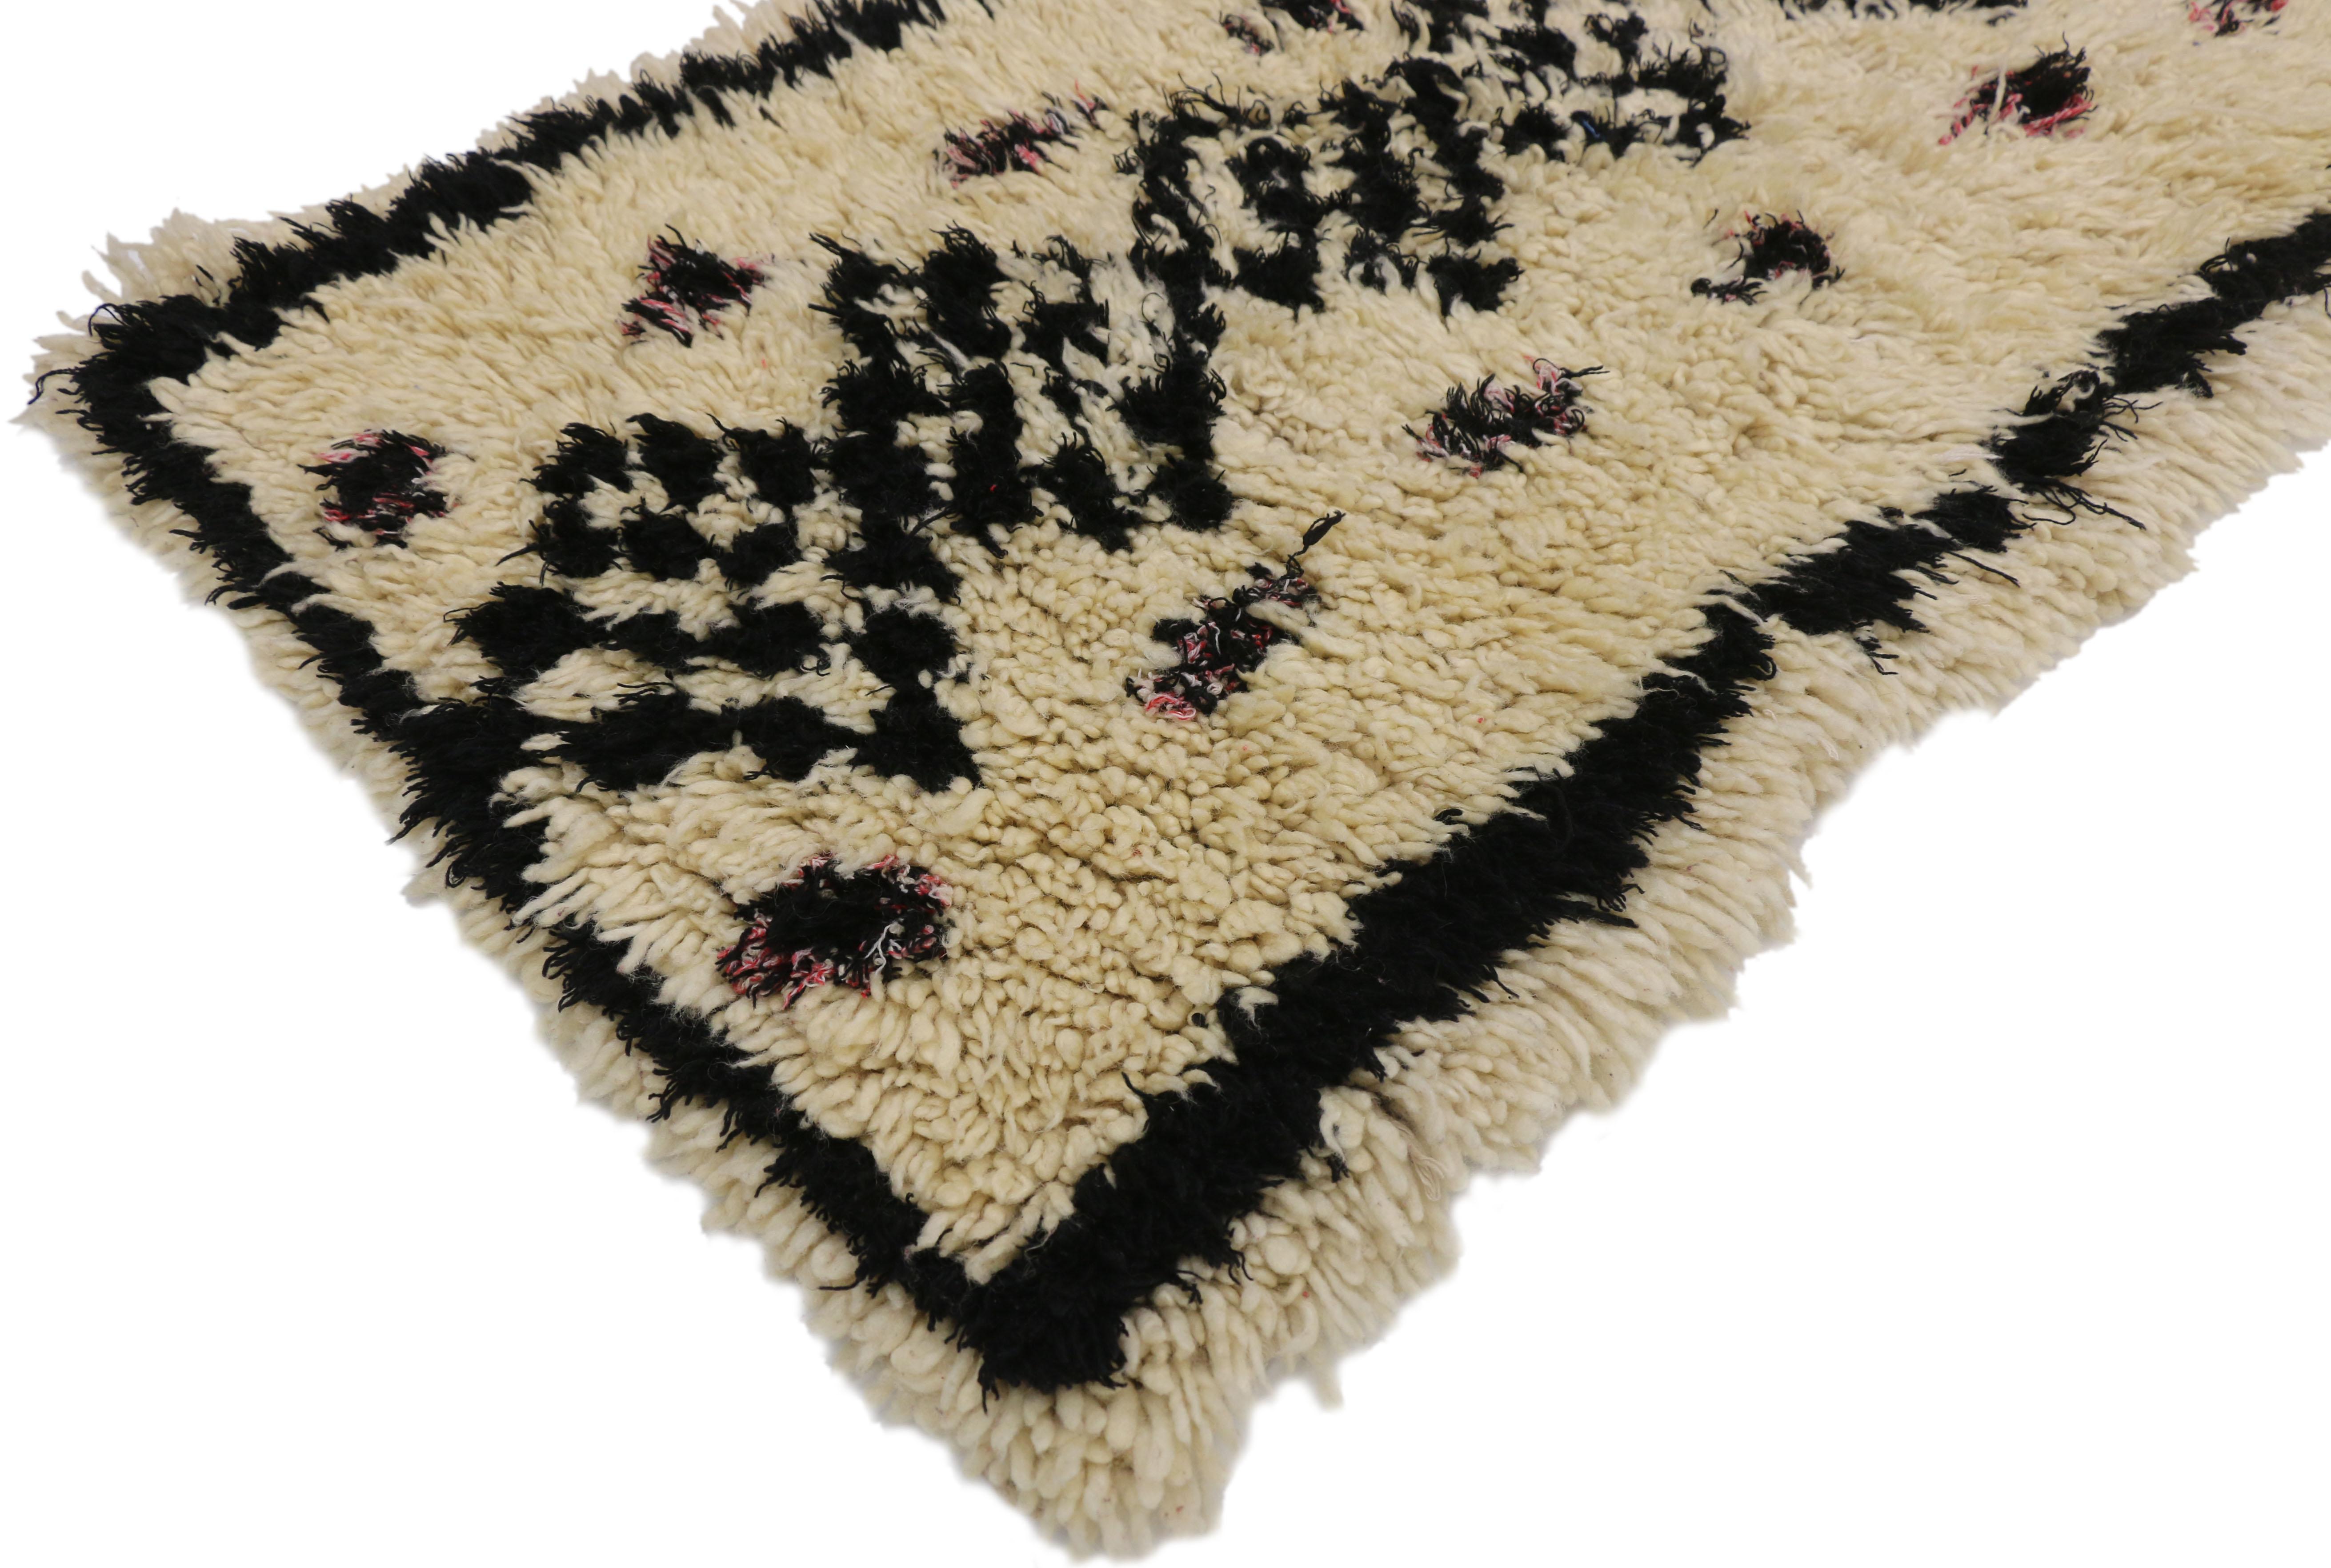 20850, vintage Moroccan Azilal rug, Berber Boucherouite rug. This vintage Moroccan Azilal rug features a column of stacked diamond lozenges filled with a checkerboard pattern, known as partridge eyes representing beauty. The diamonds are dotted by